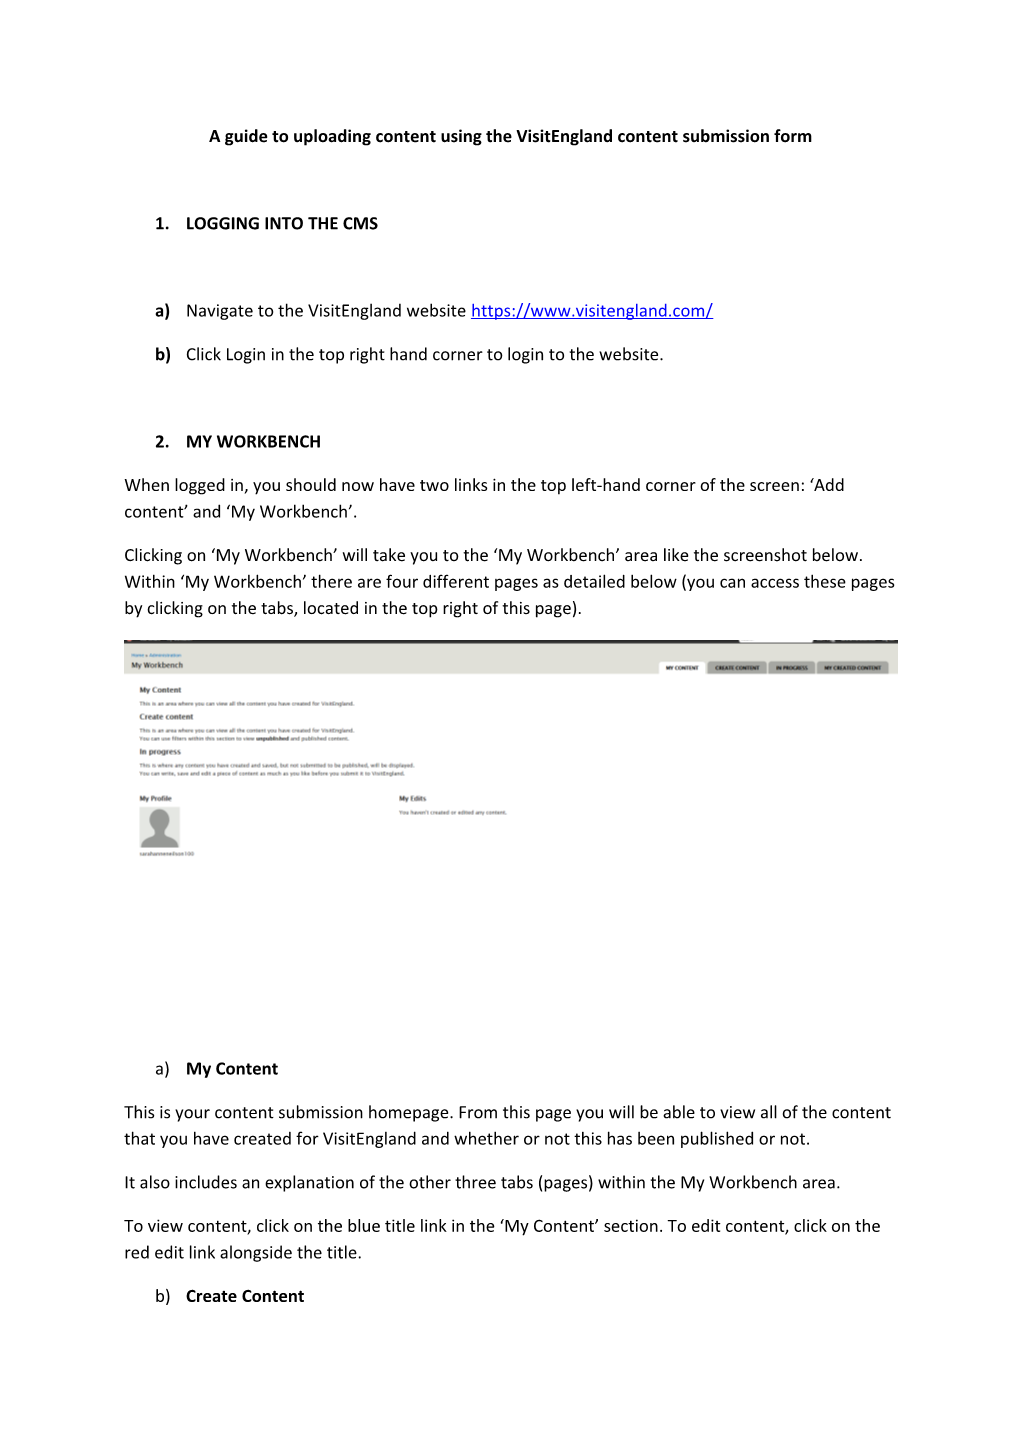 A Guide to Uploading Content Using the Visitengland Content Submission Form